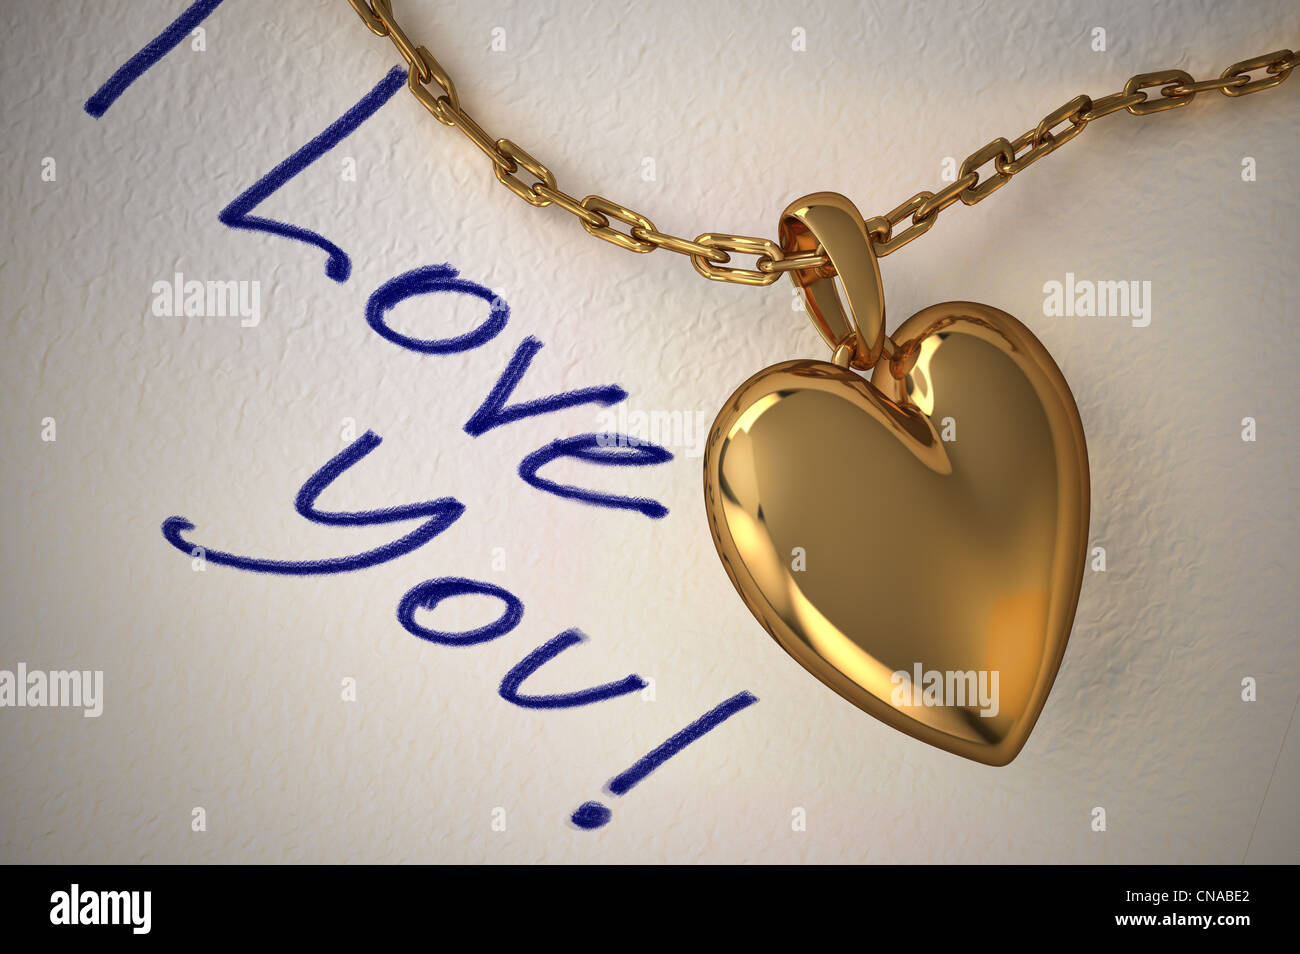 Gold heart pendant on a white paper with the type I love you, hand written on it. Stock Photo